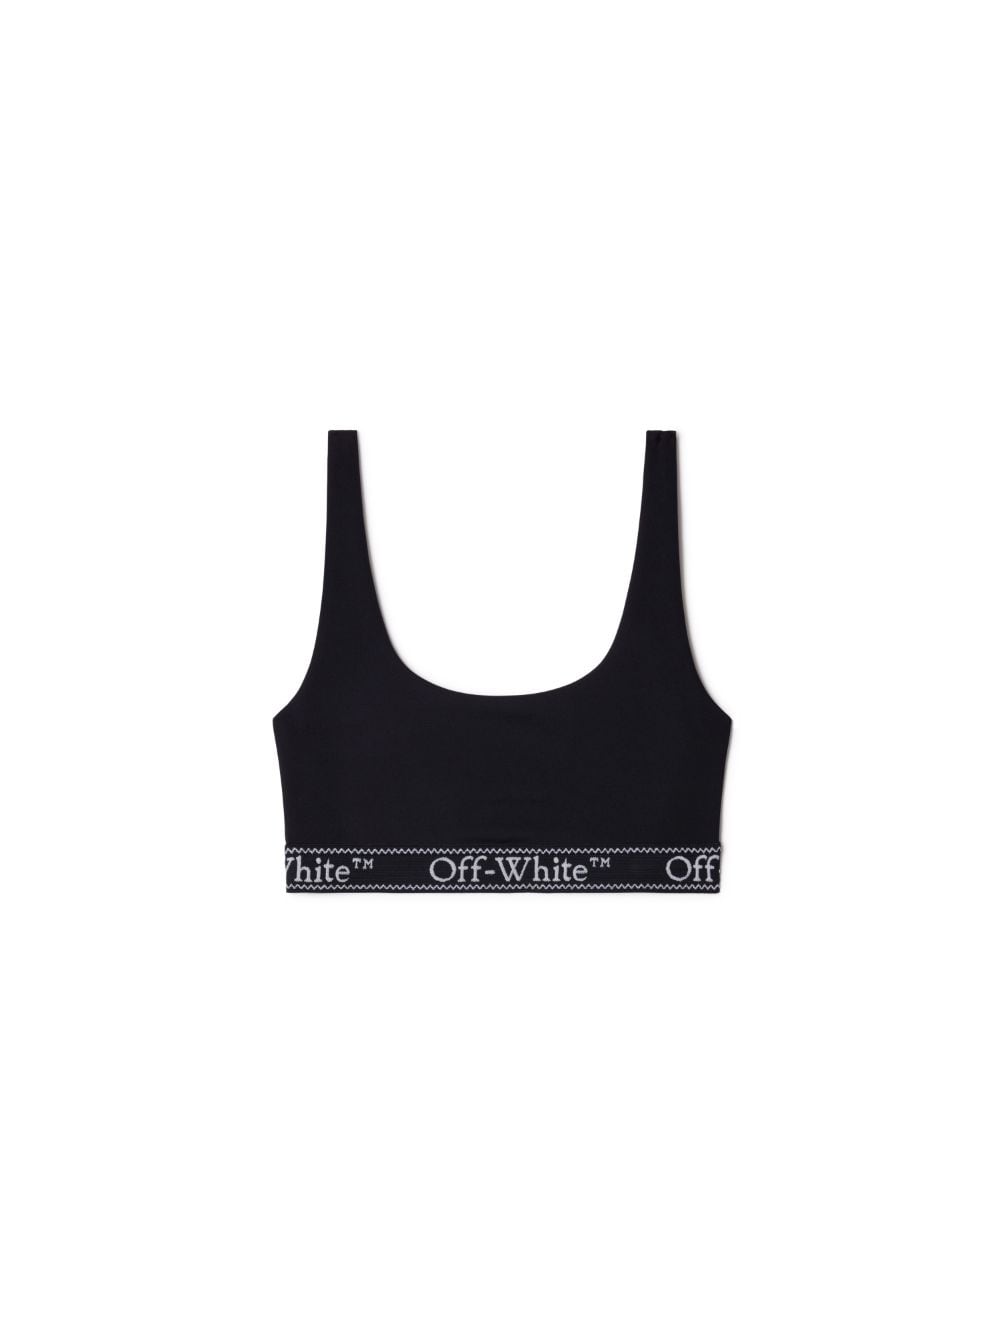 LOGOBAND BRA in black  Off-White™ Official IT